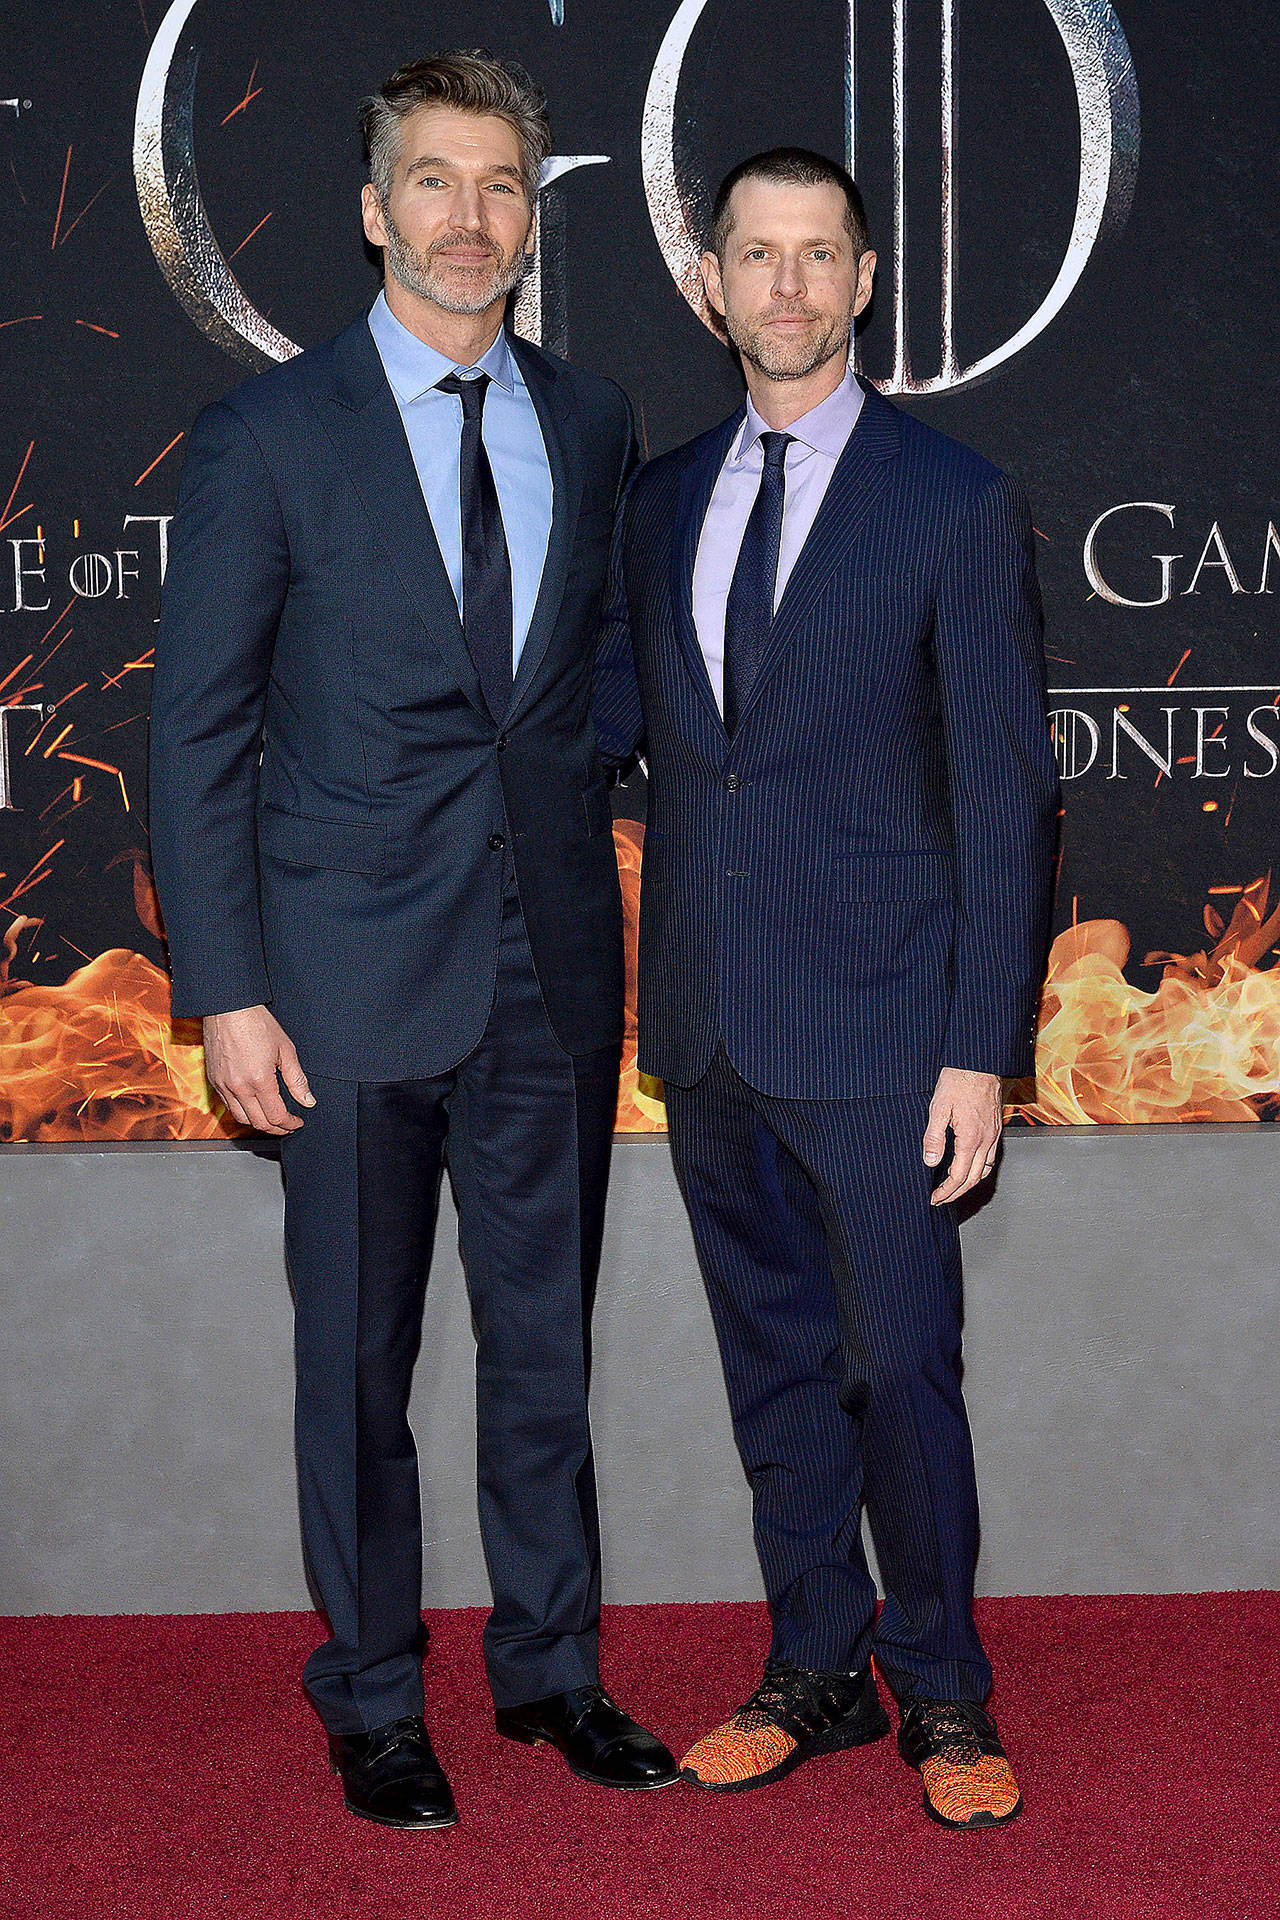 David Benioff (left) and D.B. Weiss attend HBO’s “Game of Thrones” eighth and final season premiere at New York’s Radio City Music Hall in April. (Anthony Behar/Sipa USA)